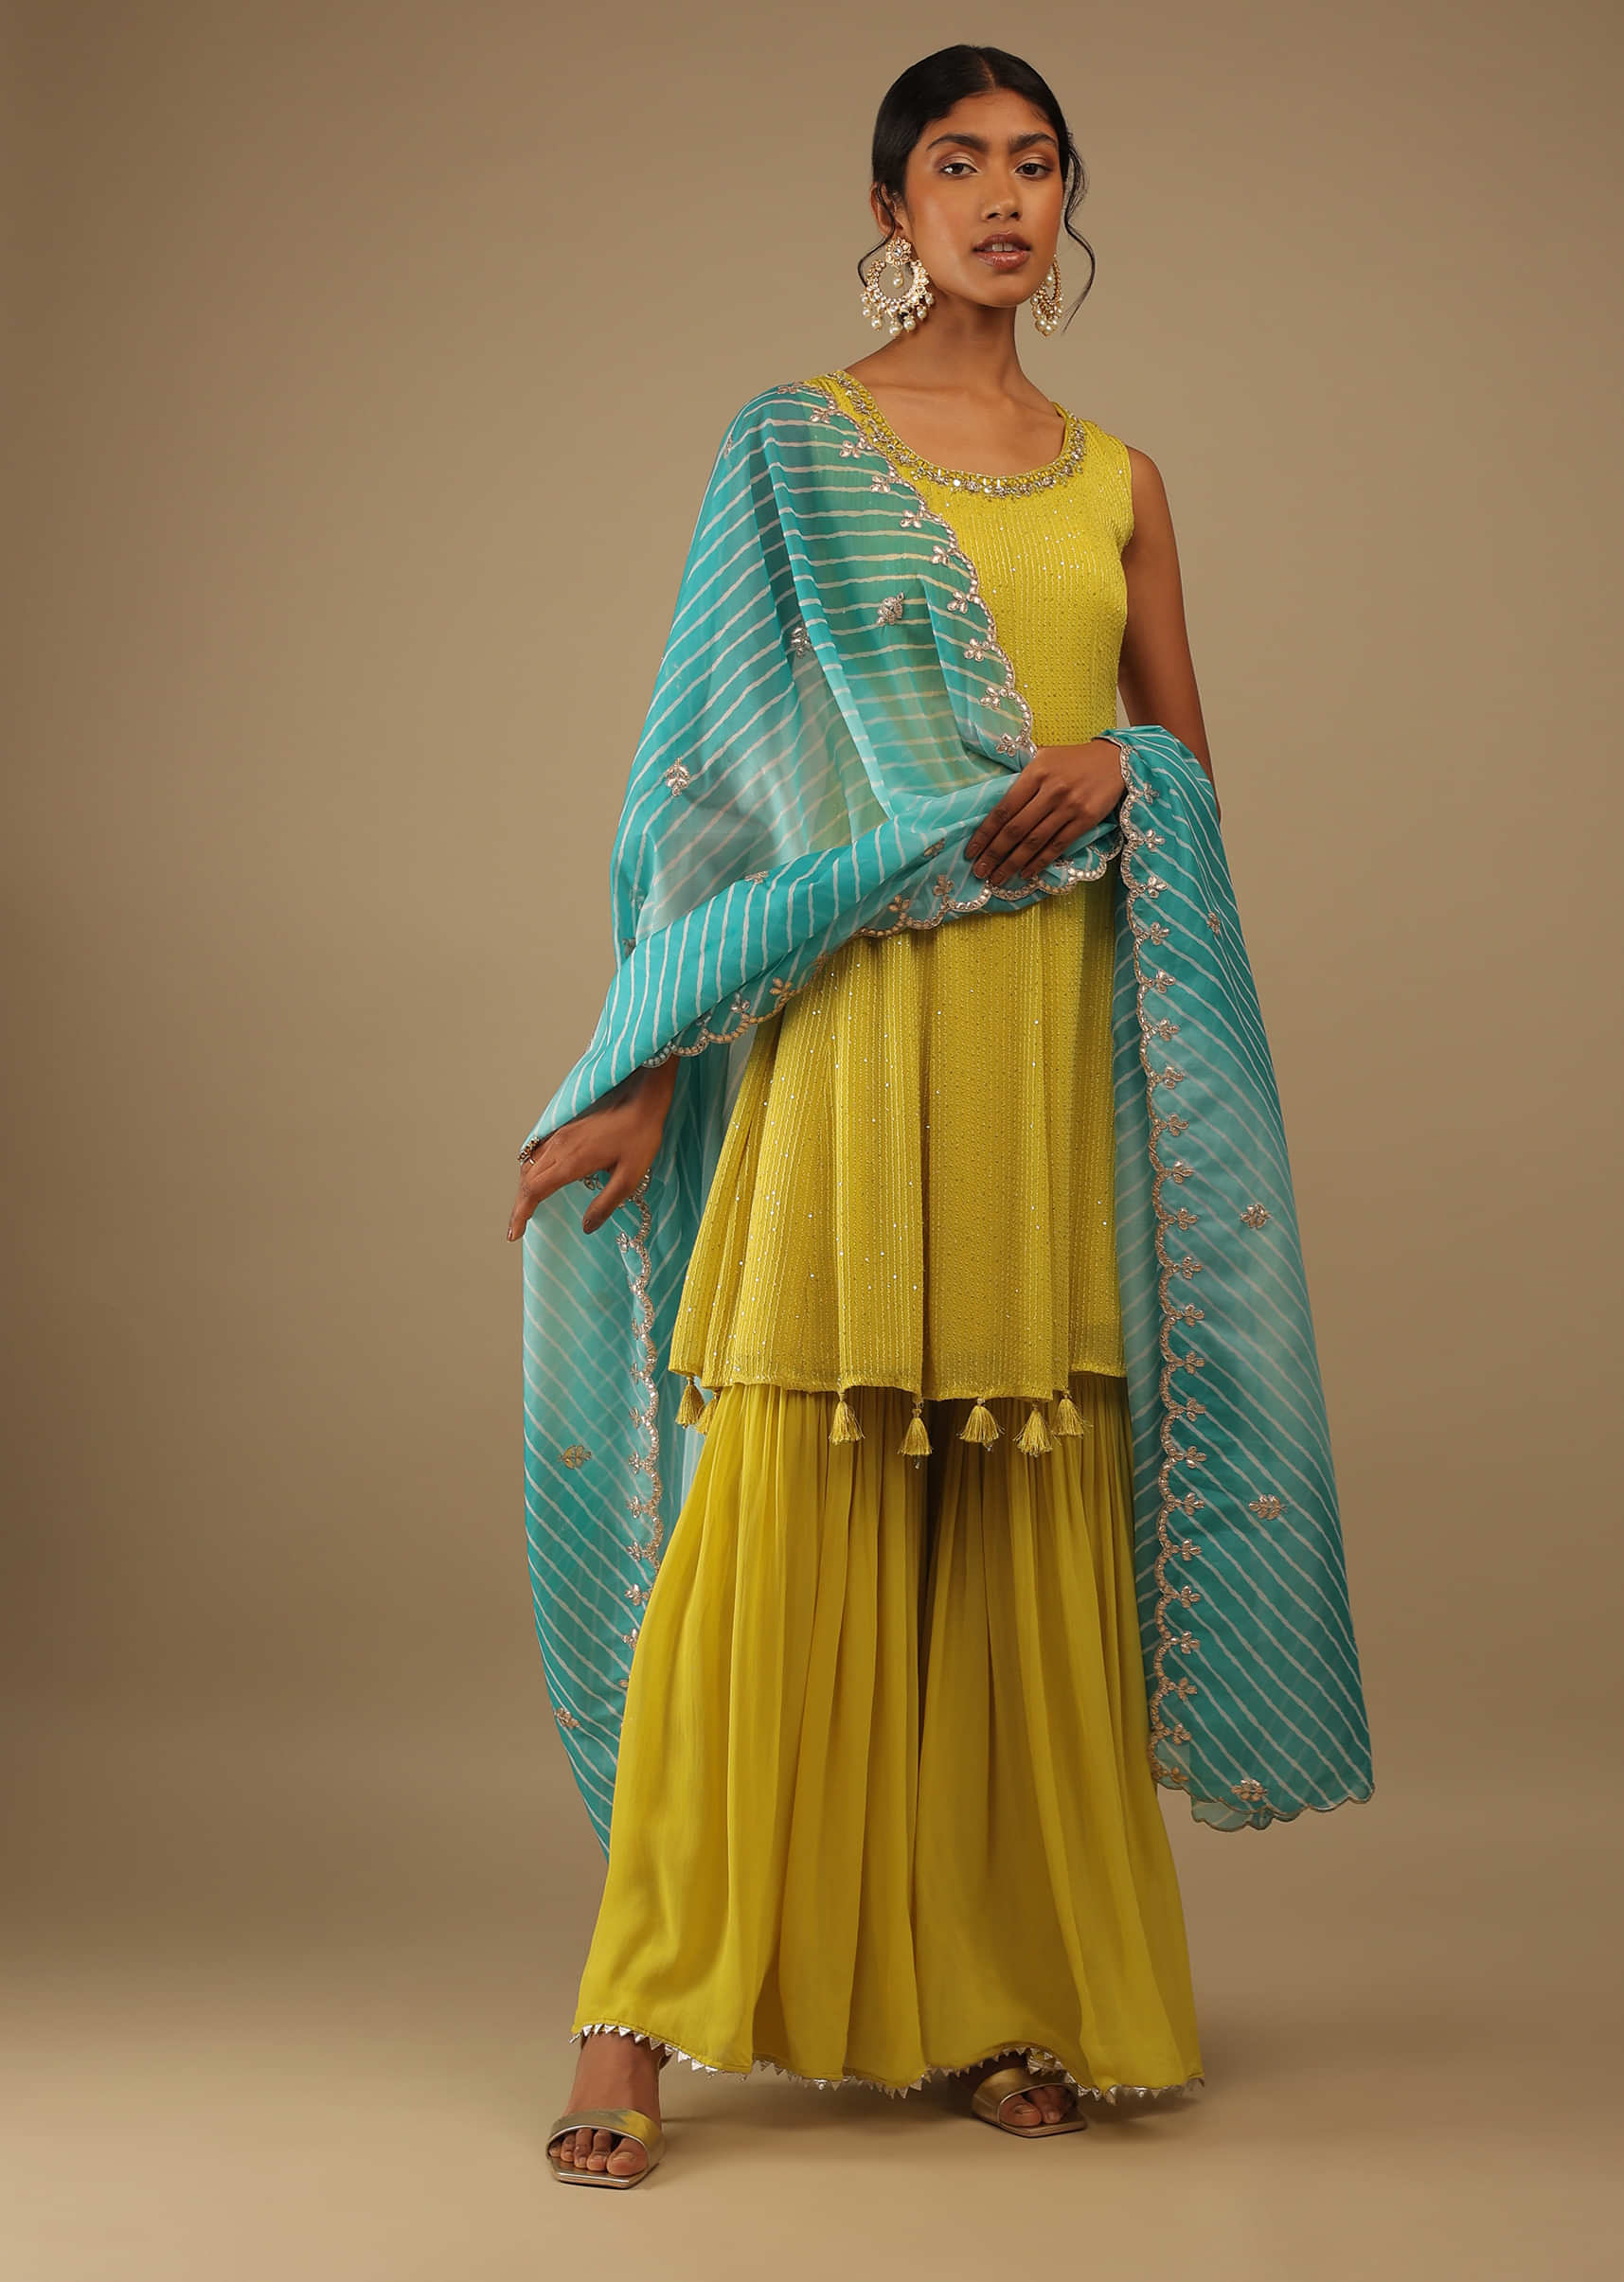 Citrus Green Sharara Pants And Kurta In Sleeveless, Kurta Crafted In Net With Resham And Sequins Embroidery